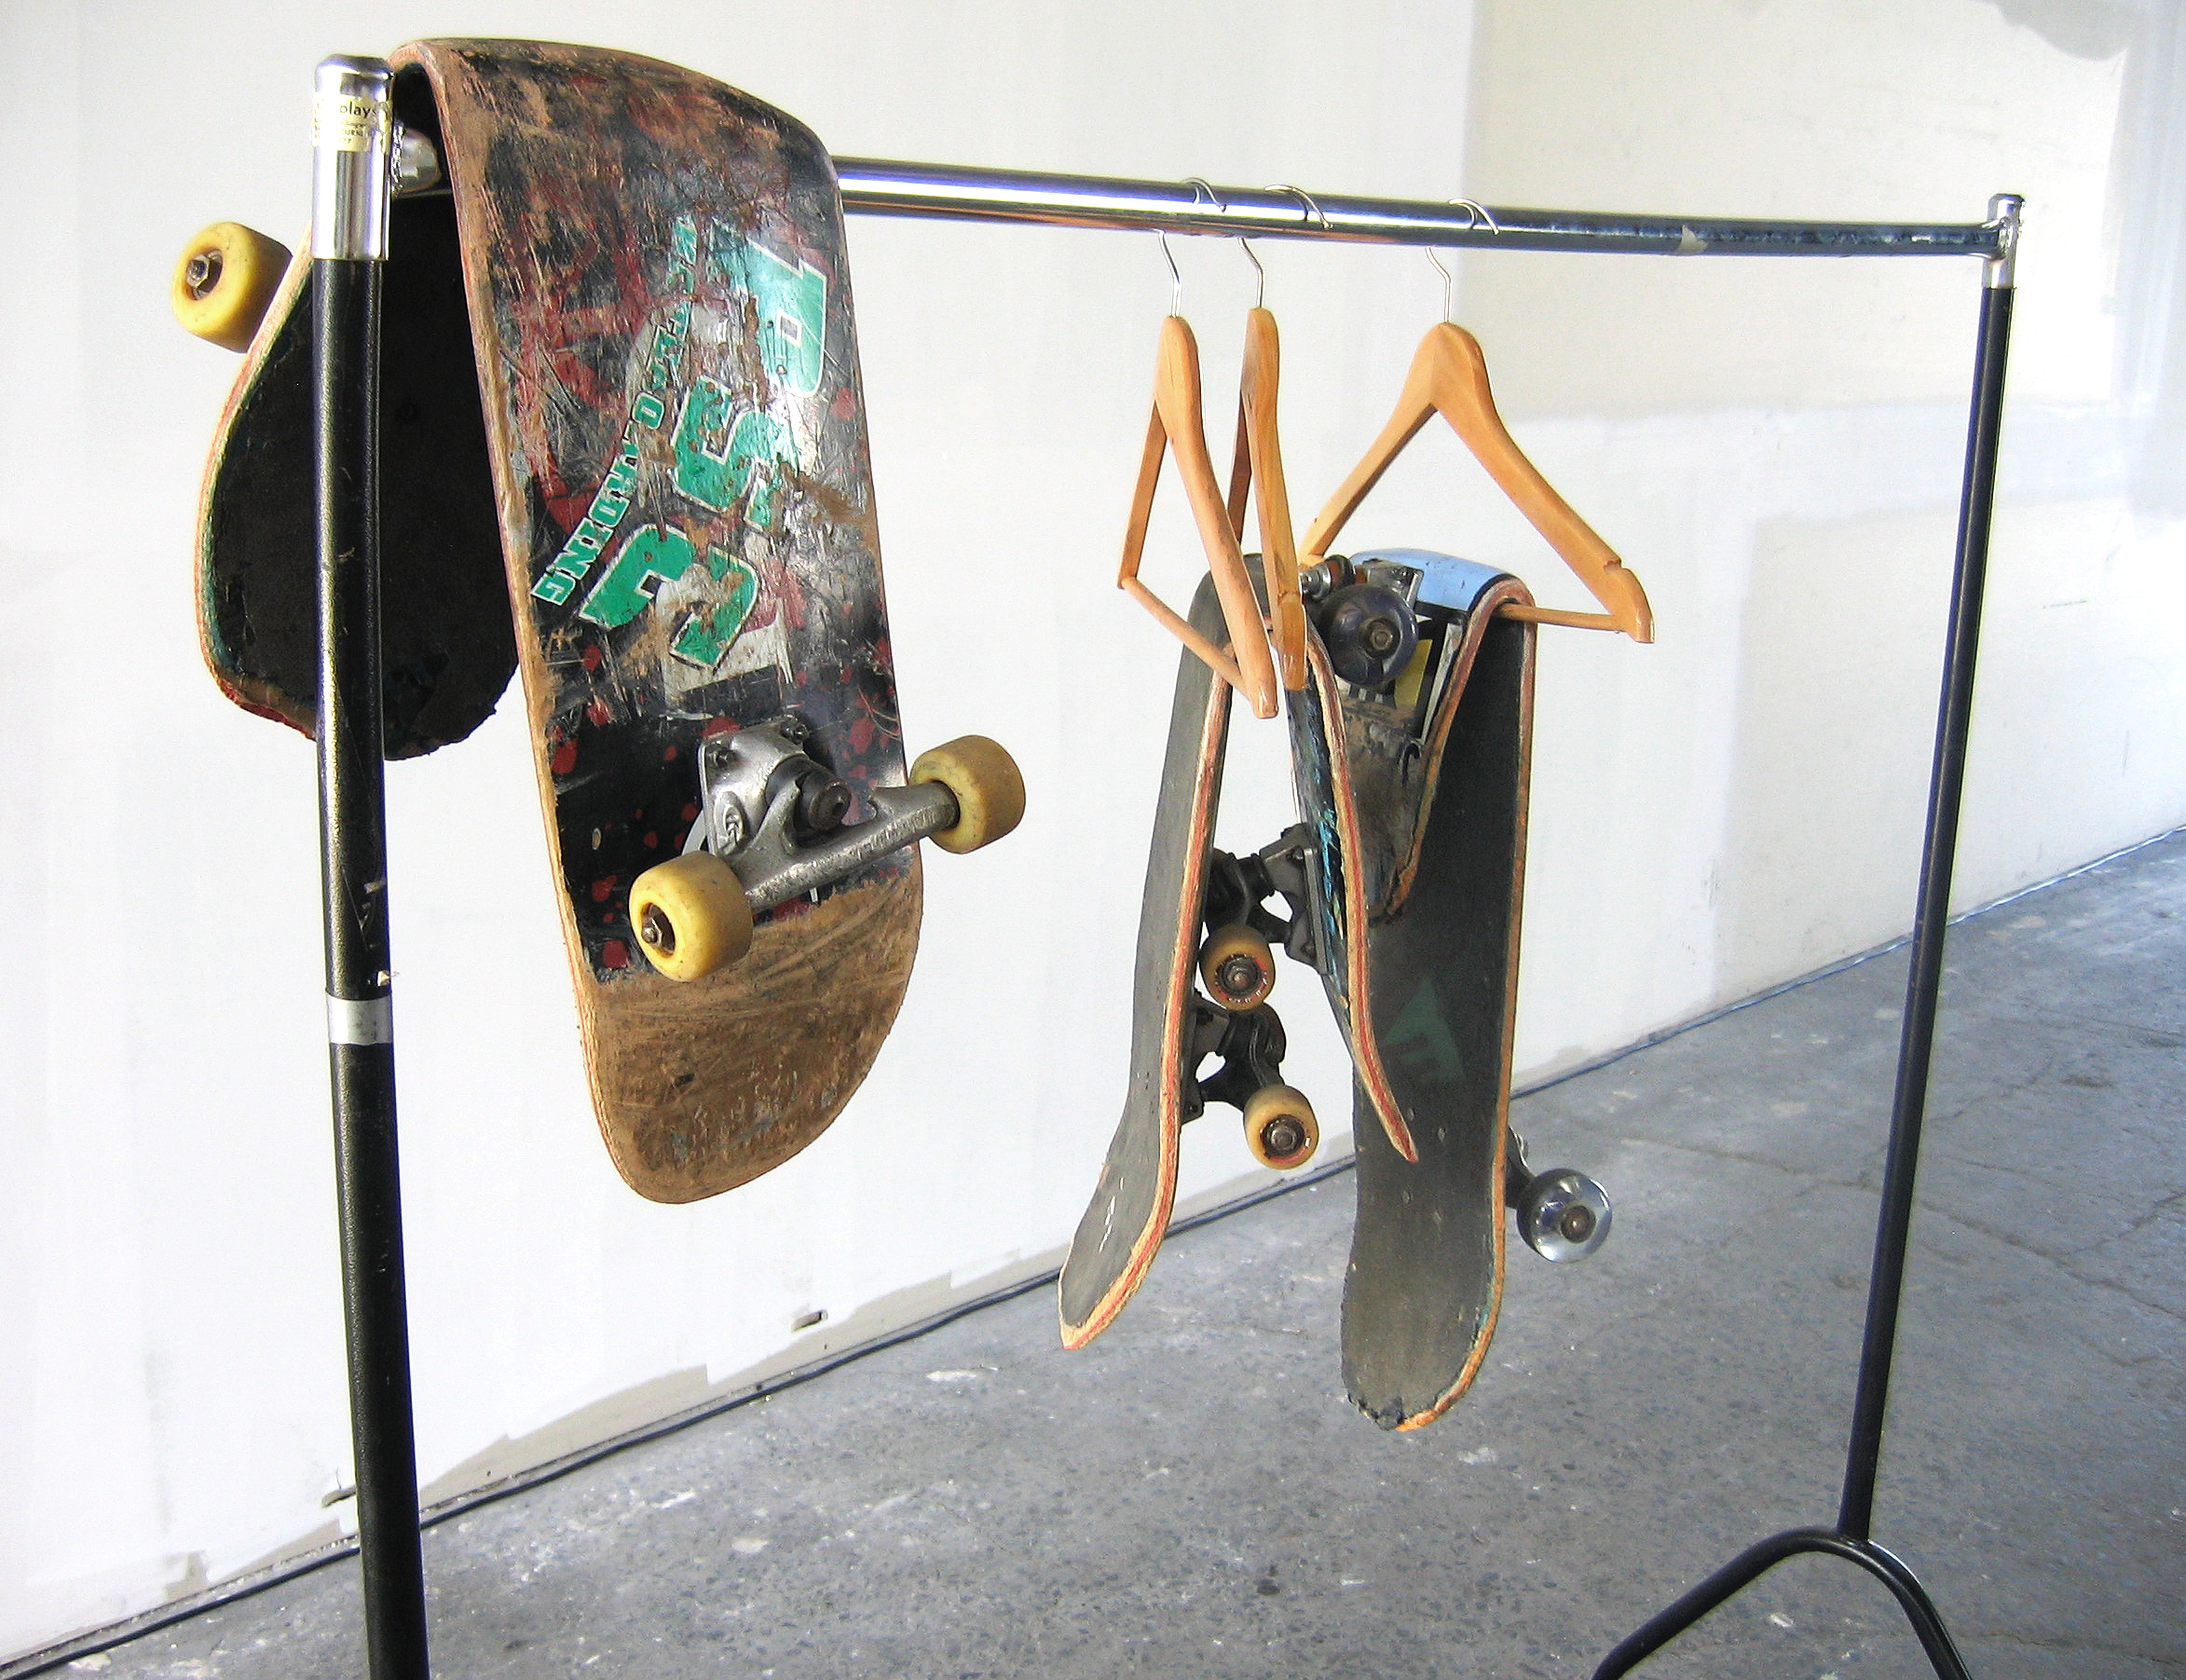   Skateboard Series , 2008 Skateboard, Mixed Media Dimensions Variable   Motor 08 , curated by Jason Waterhouse, Docklands 